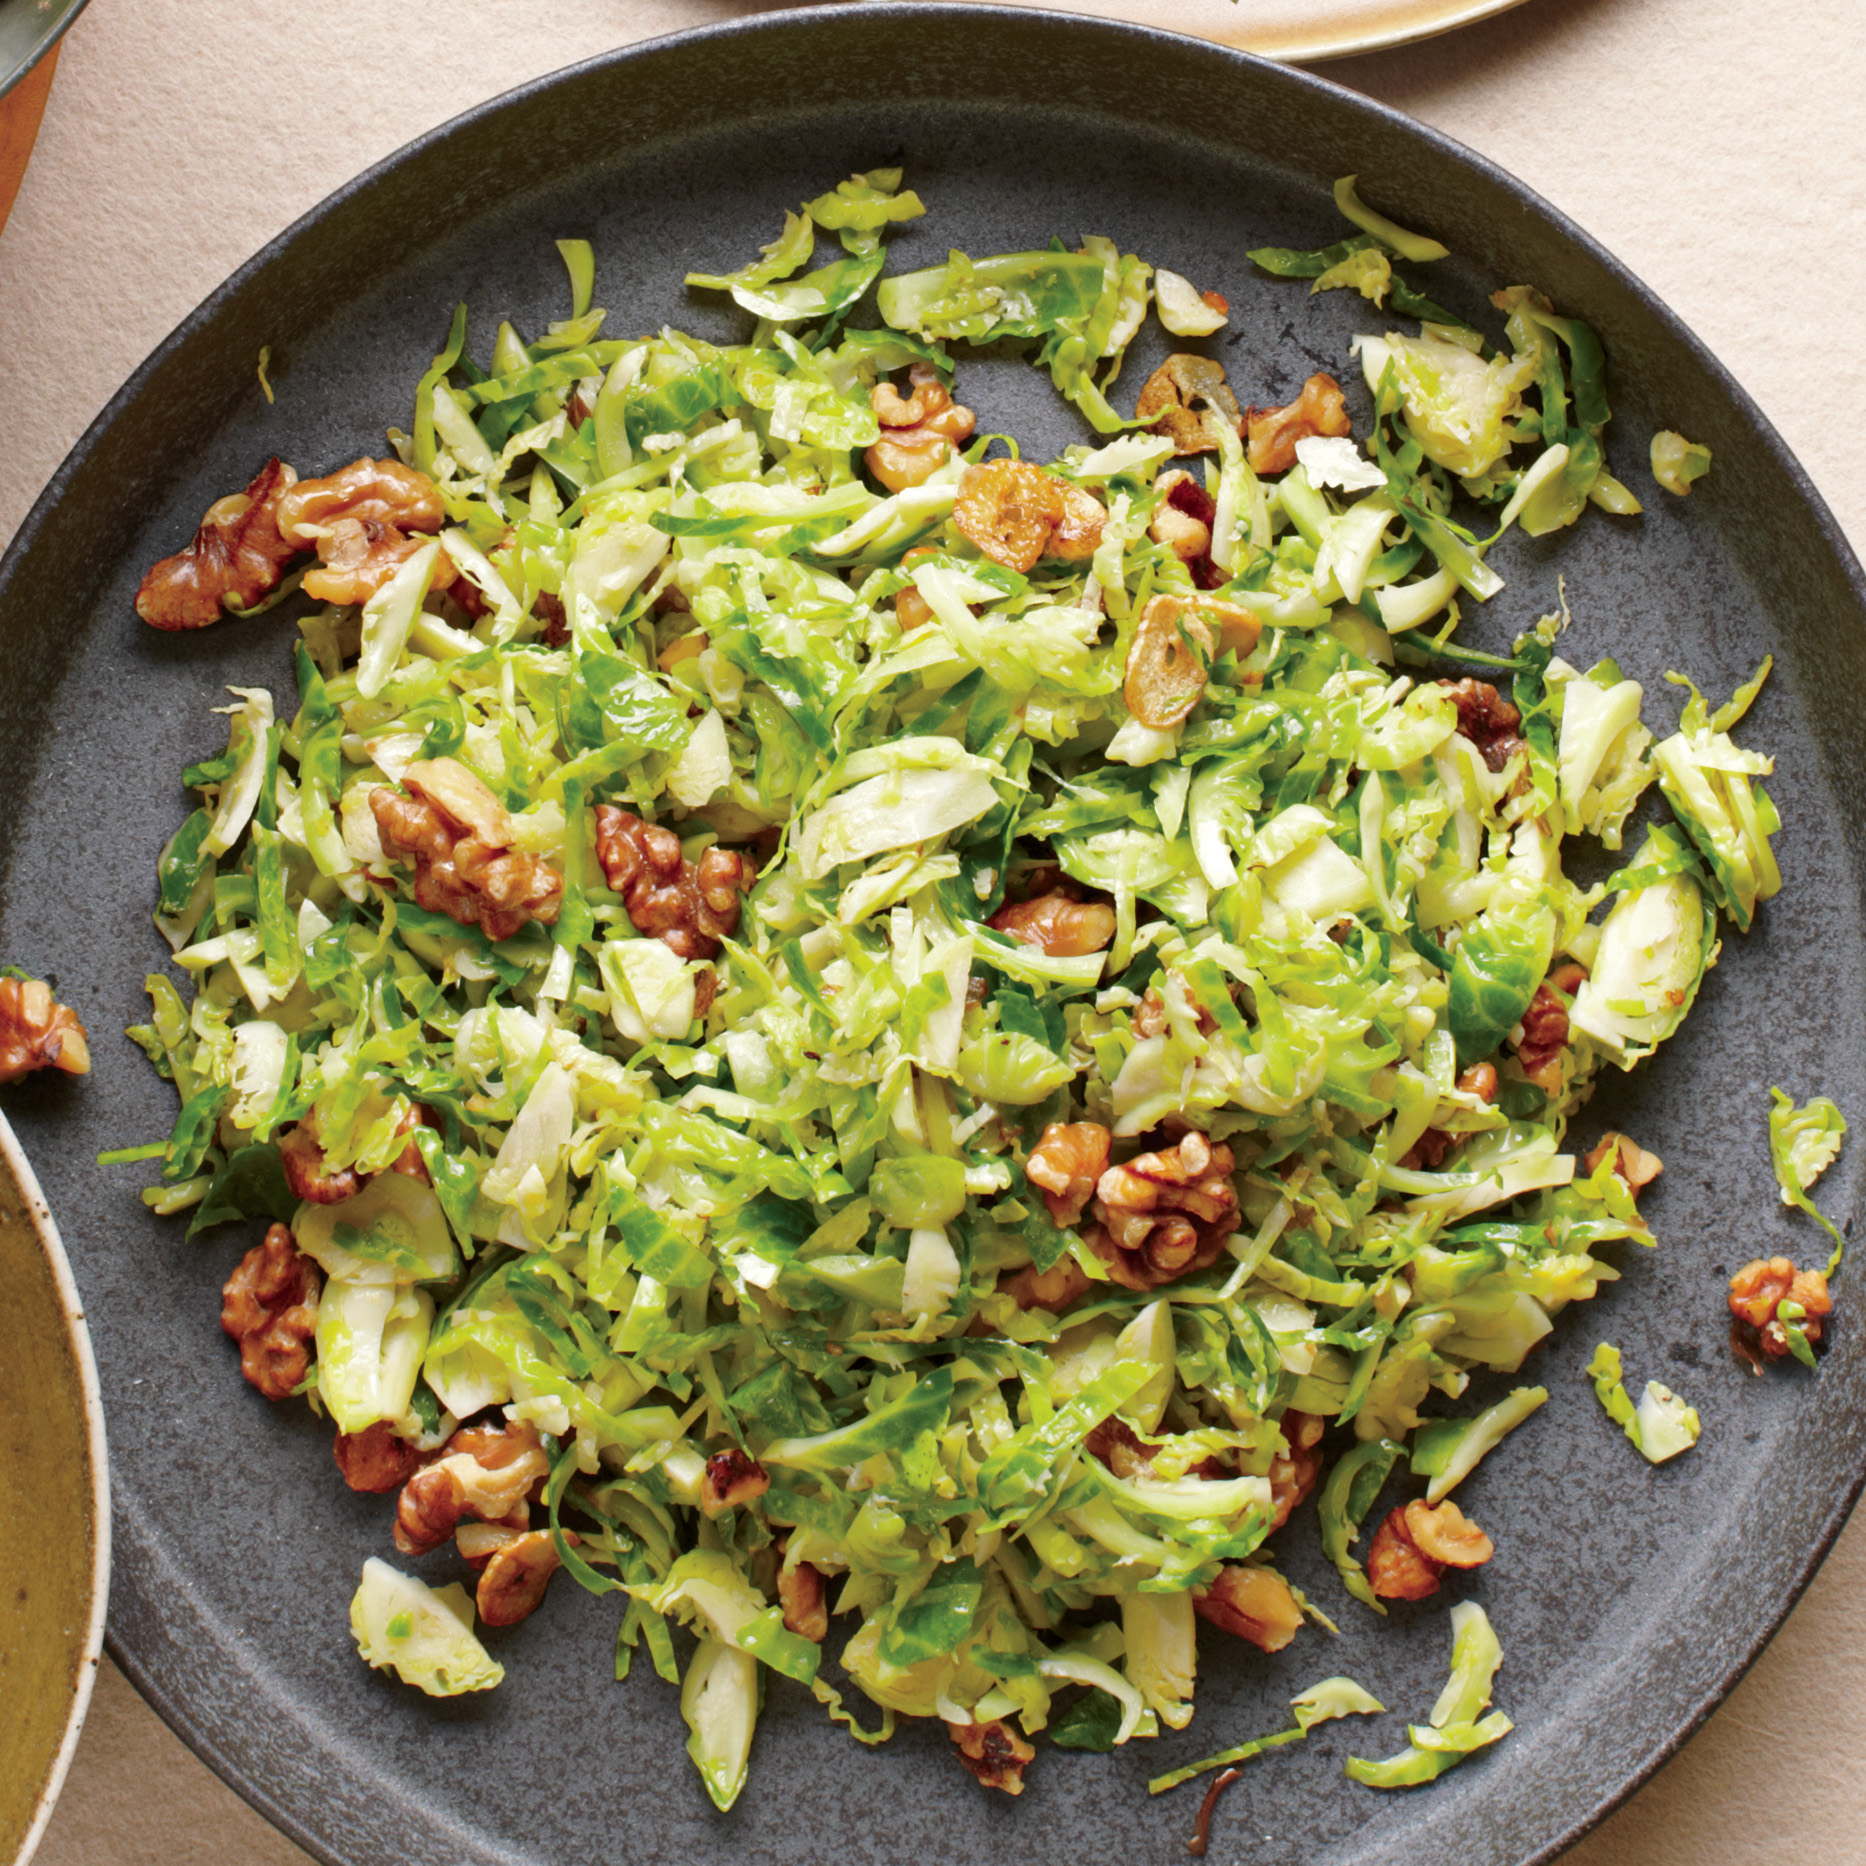 Shredded Brussels Sprouts with Walnuts 